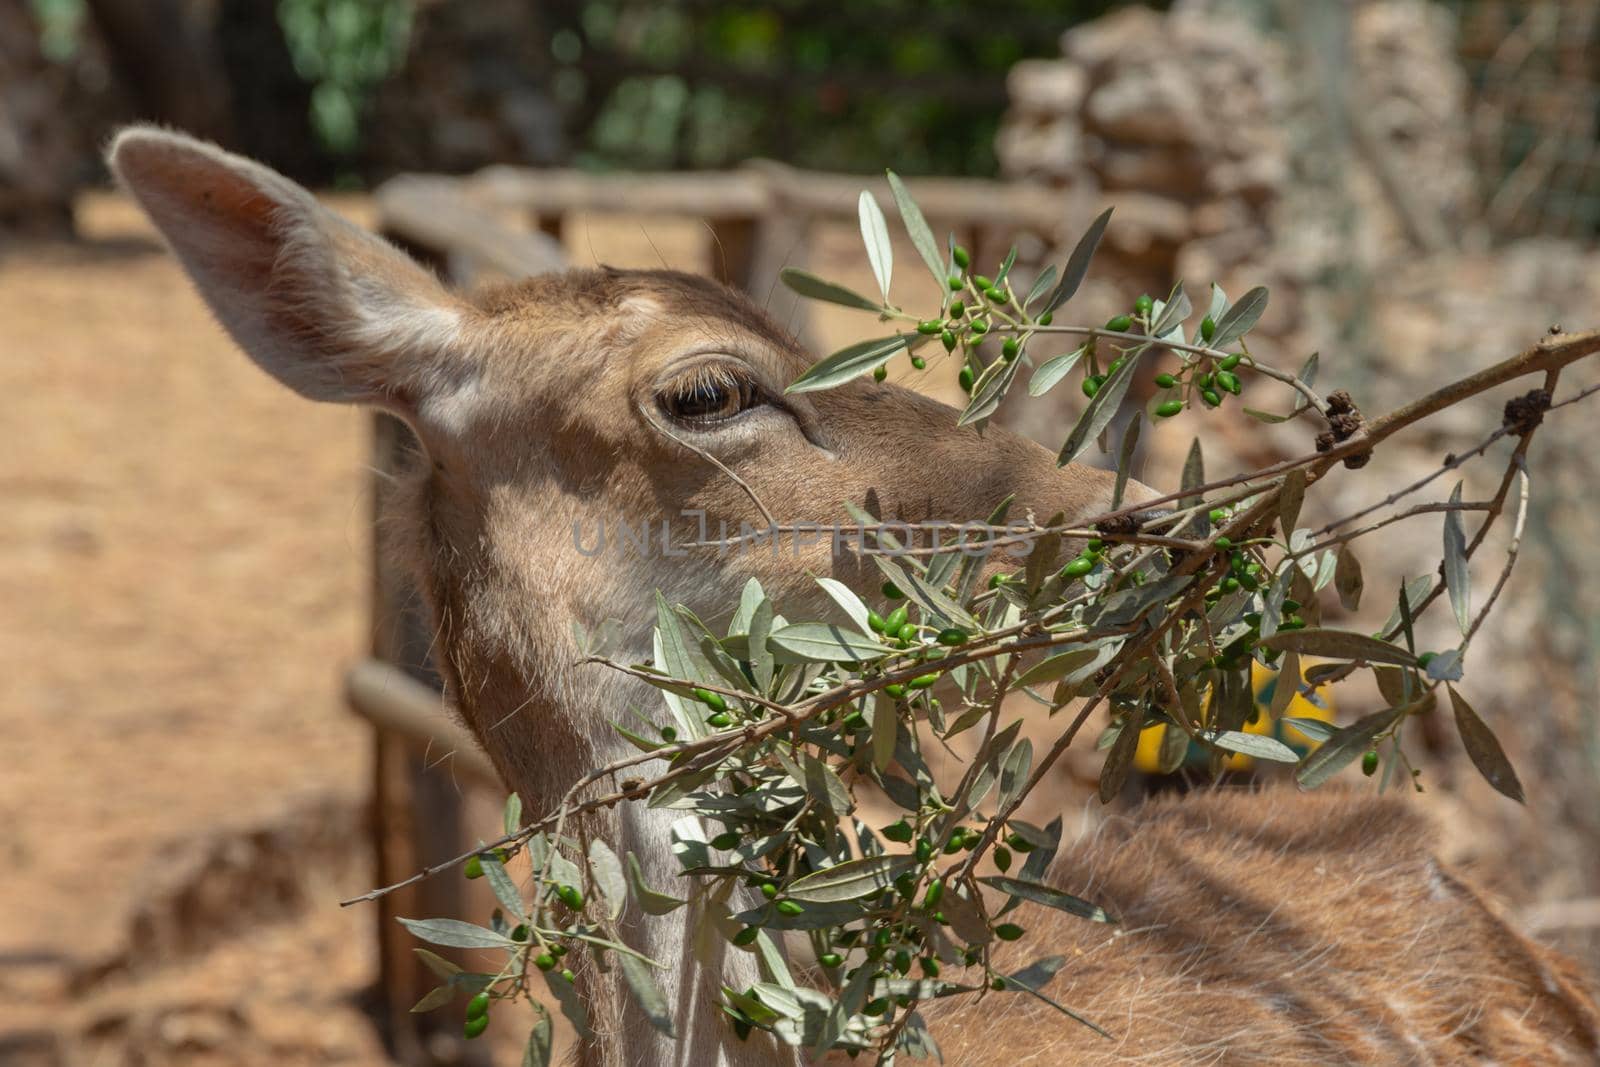 Close-up of a female deer and an olive branch on a blurry background with bokeh elements, stock photo